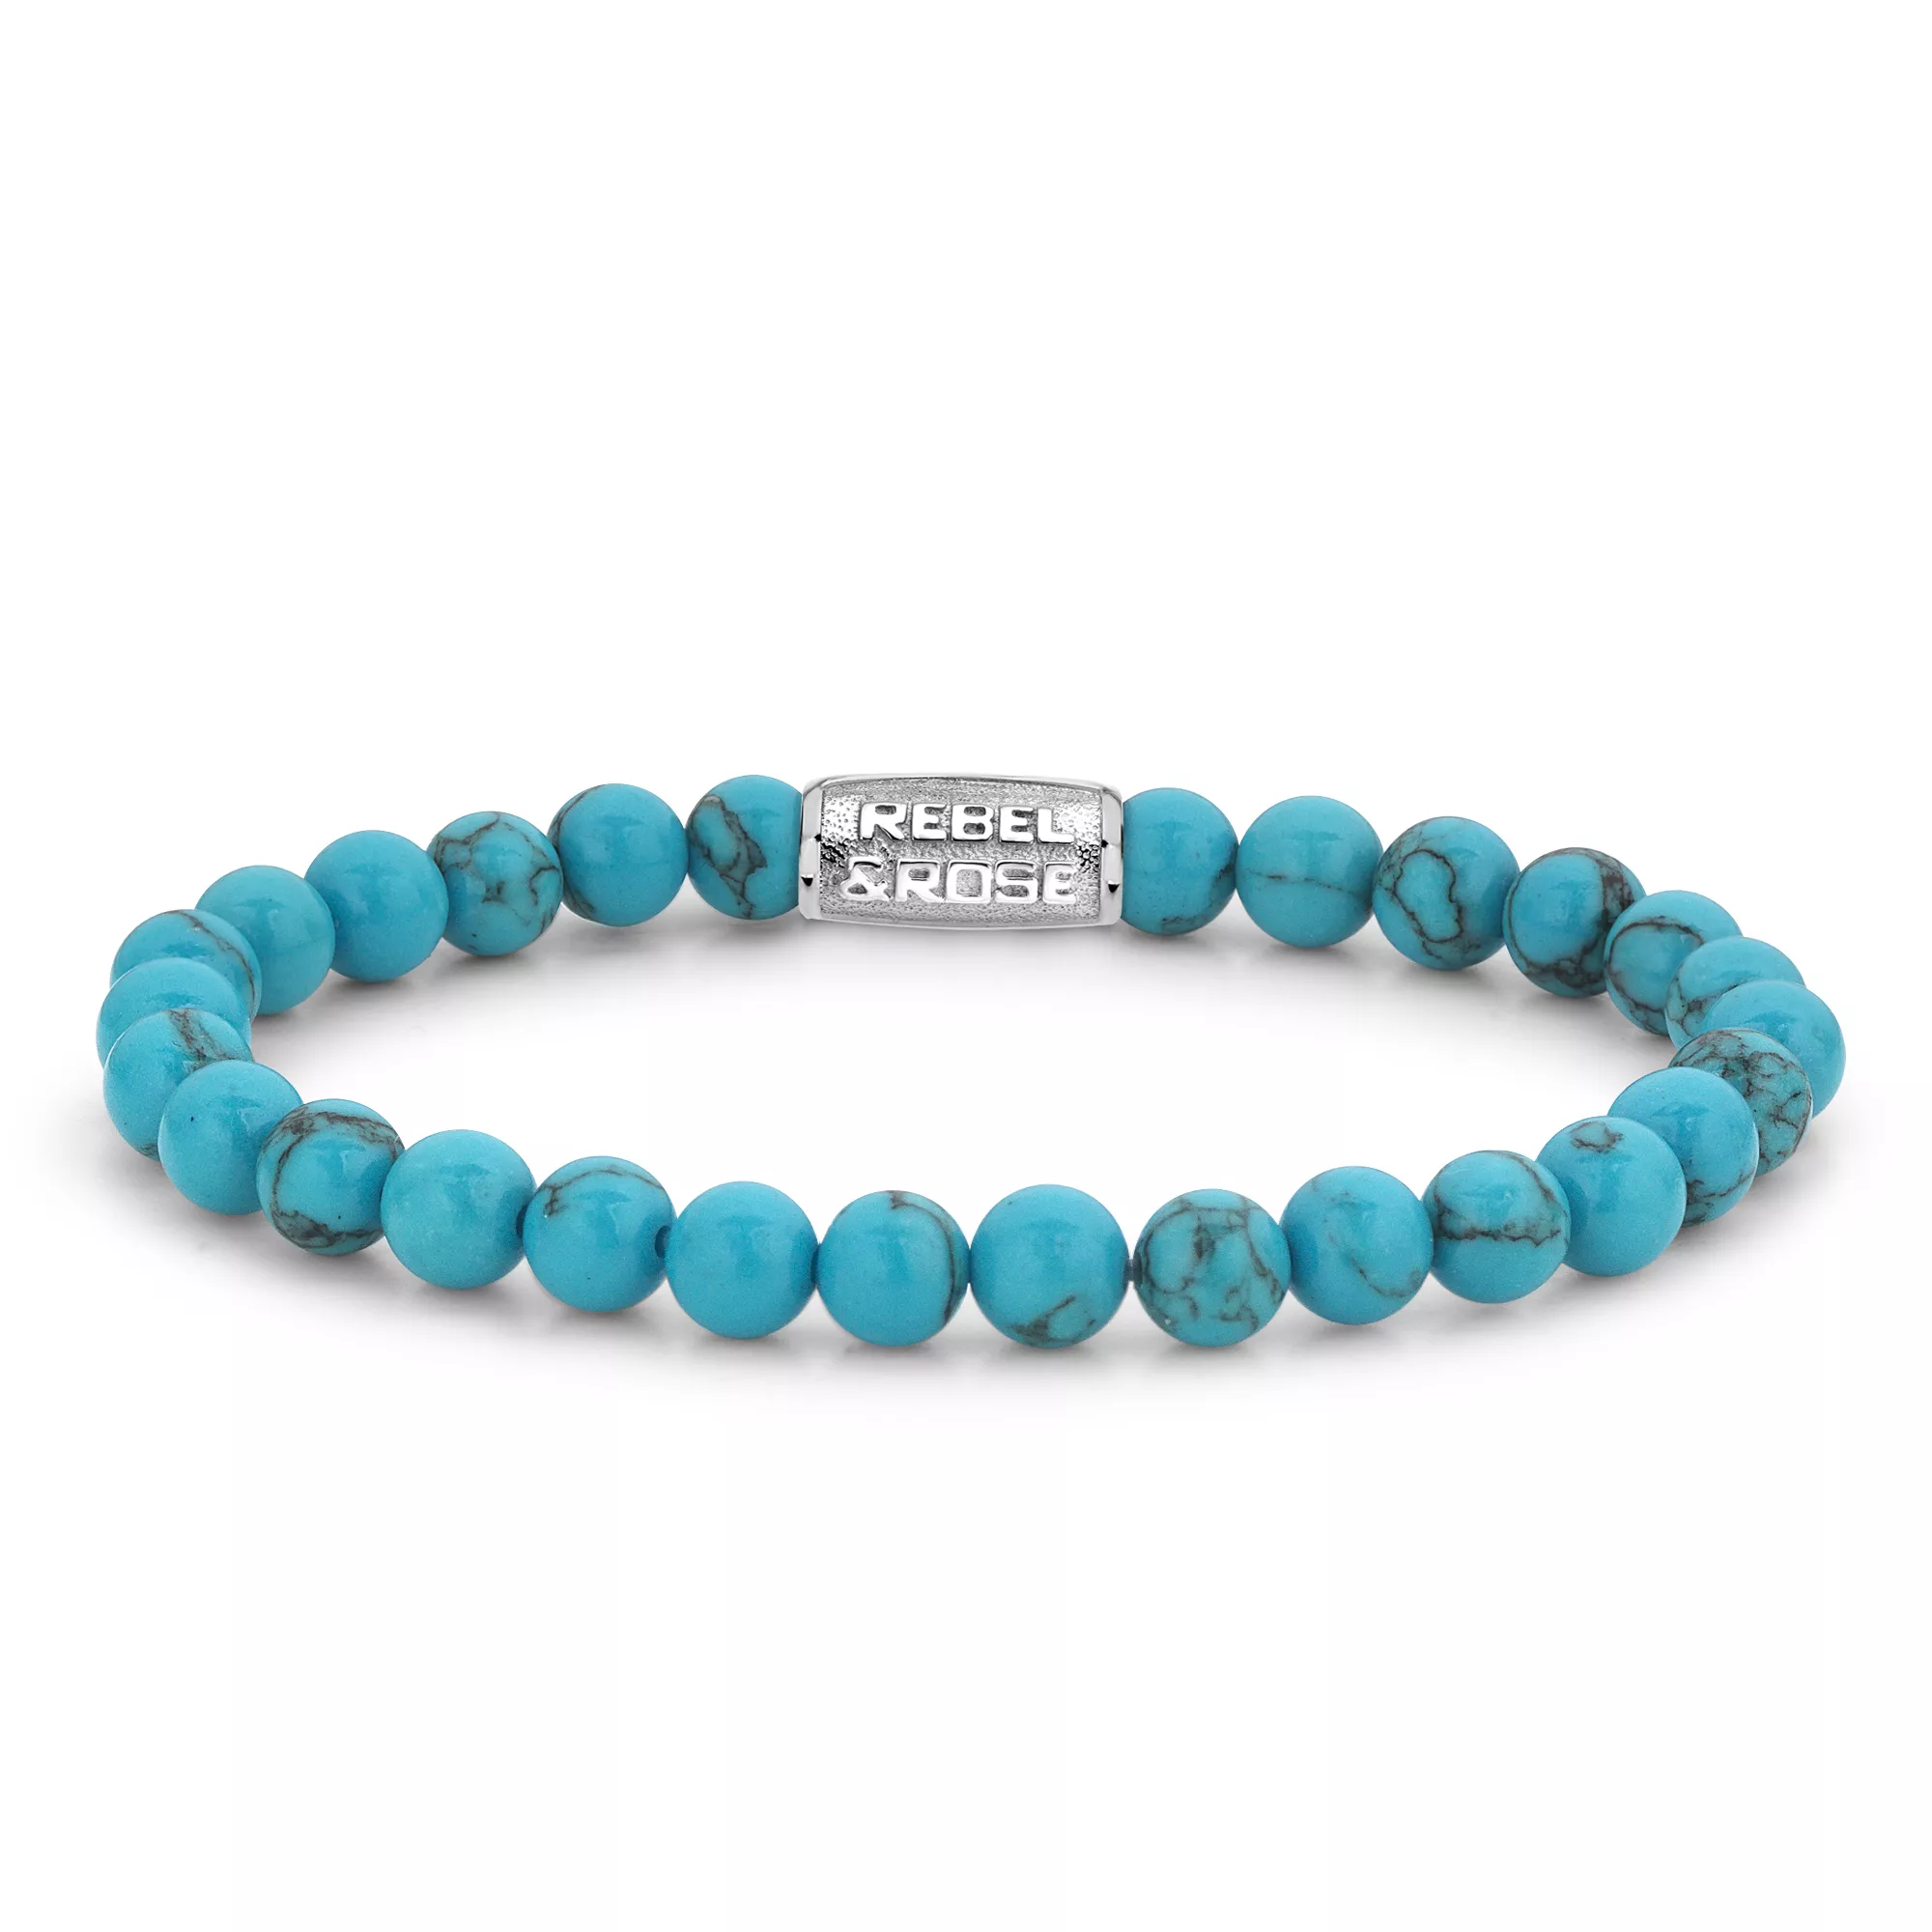 Rebel and Rose RR-60015-S Rekarmband Beads Turquoise Delight zilverkleurig-turquoise 6 mm 